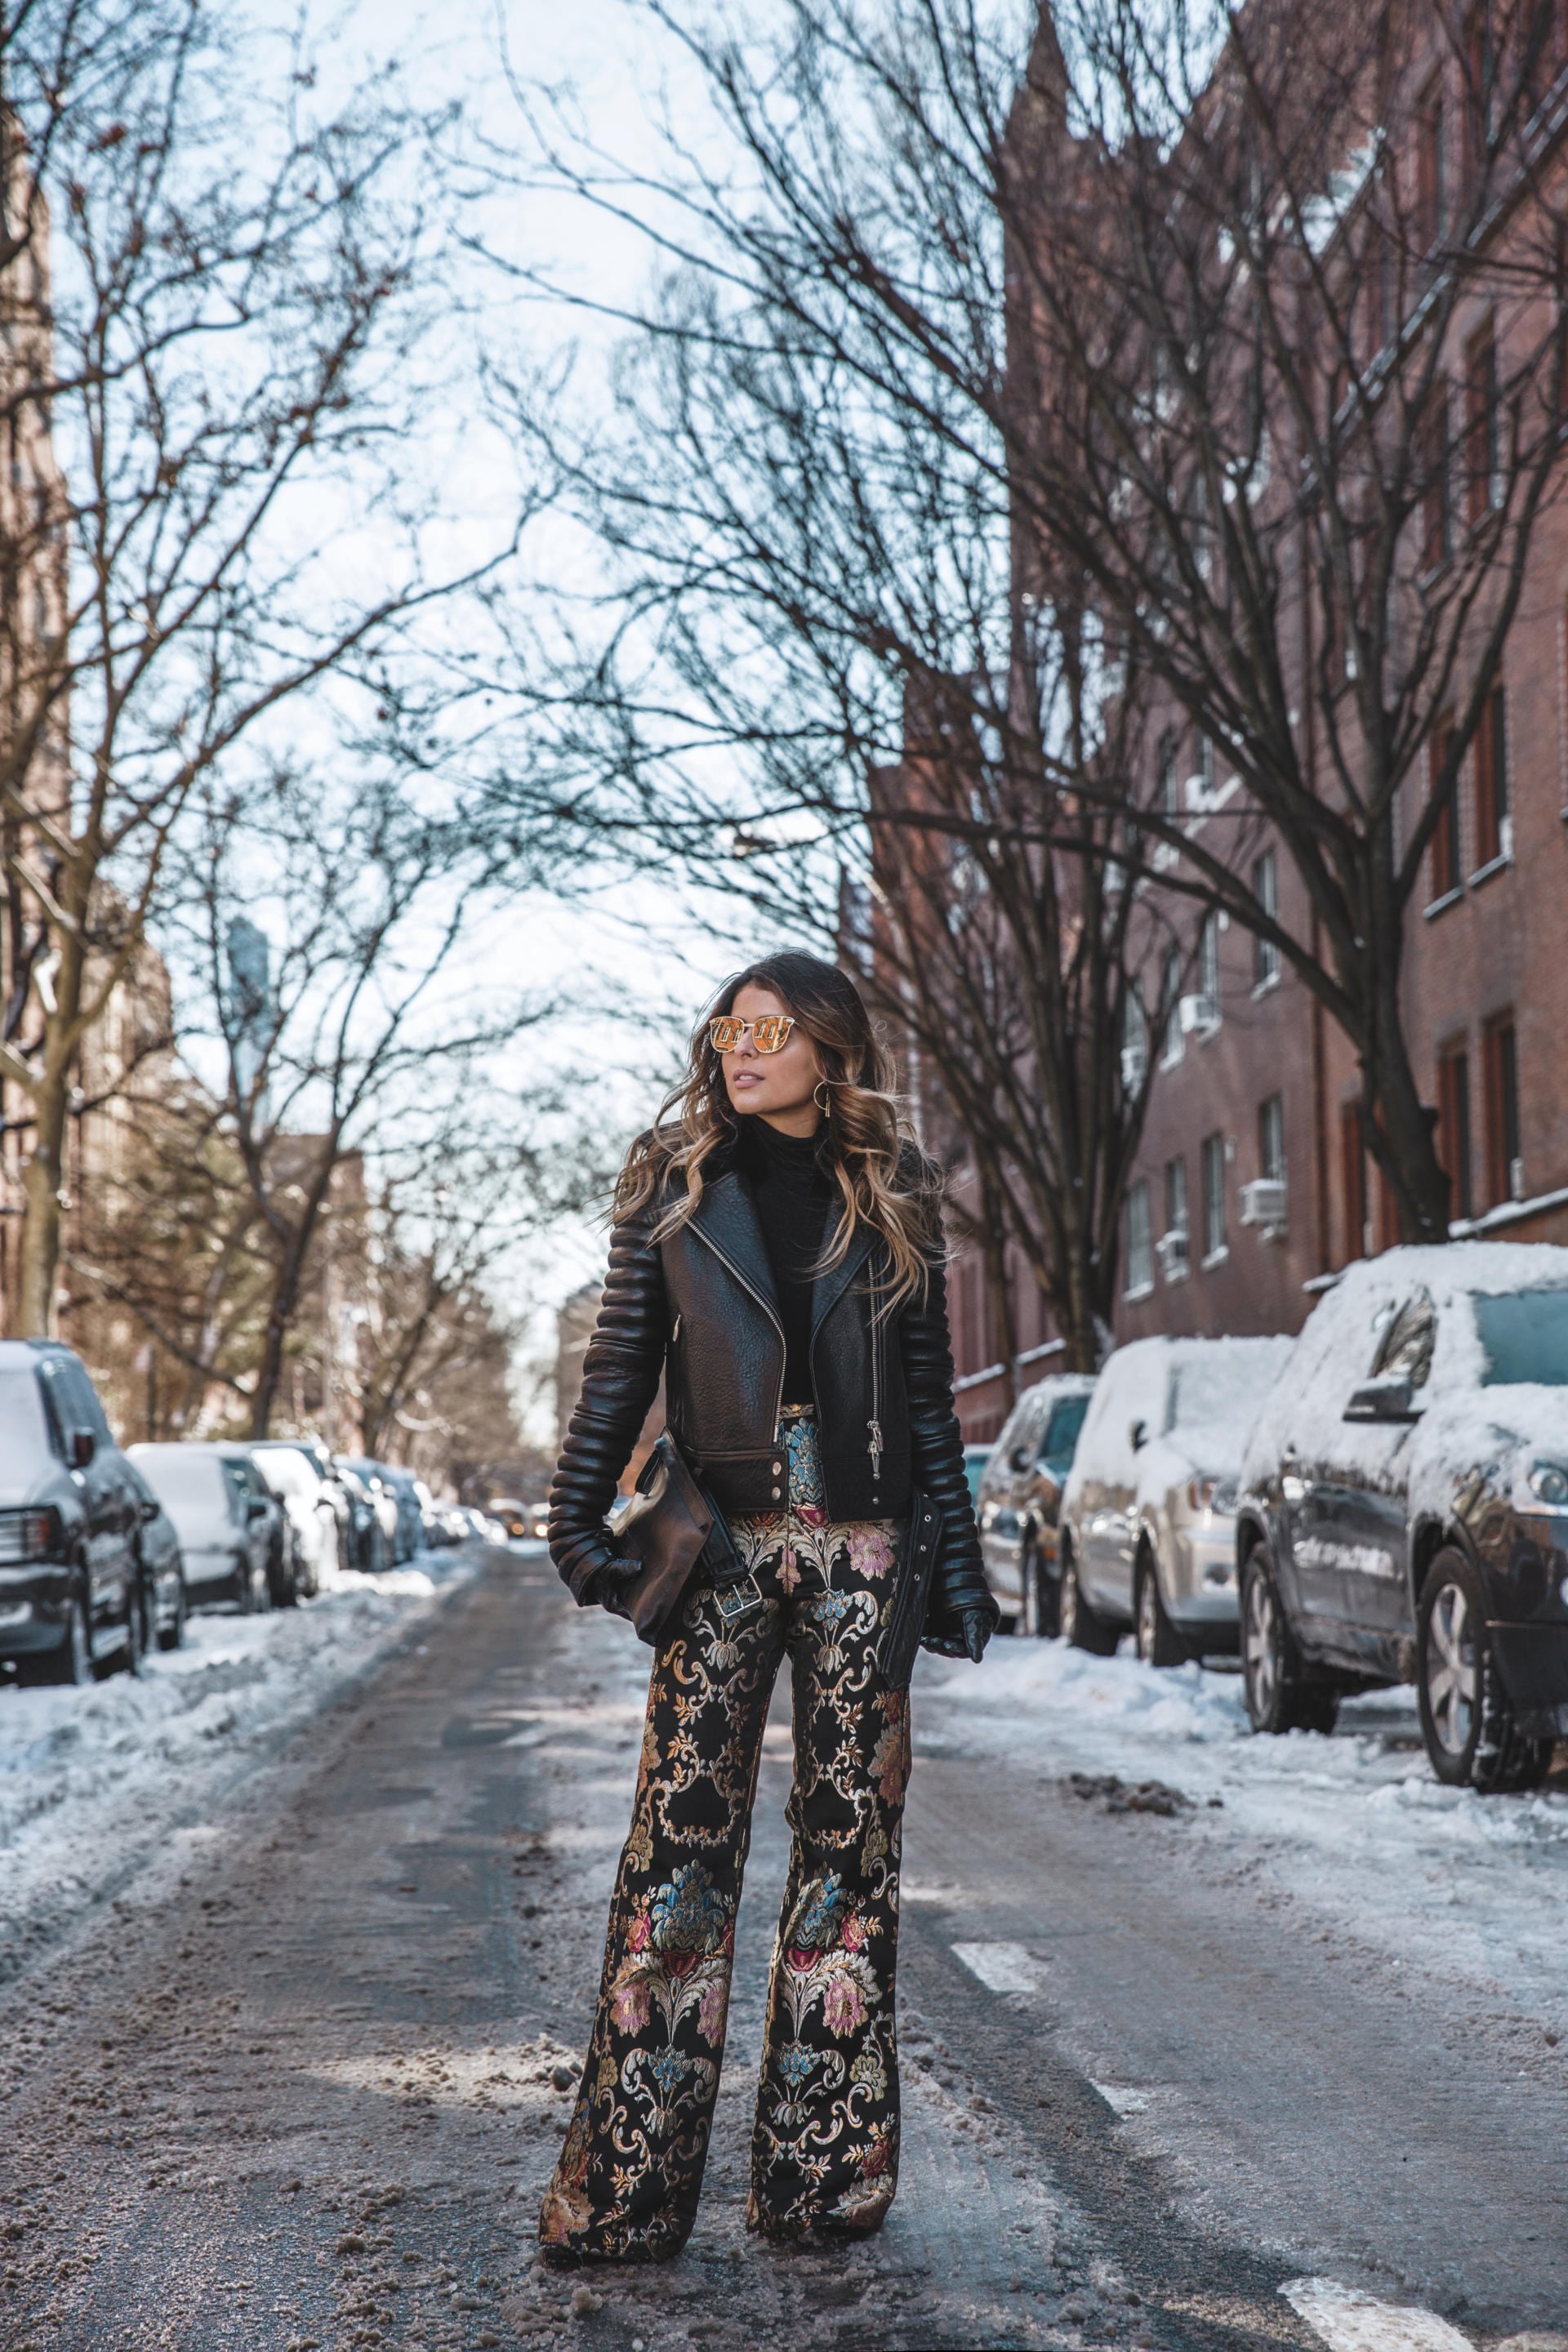 https://thegirlfrompanama.com/wp-content/uploads/2017/02/The-arrivals-leather-jacket-lpa-printed-pants-nyfw-winter-outfit-The-Girl-From-Panama-1.jpg